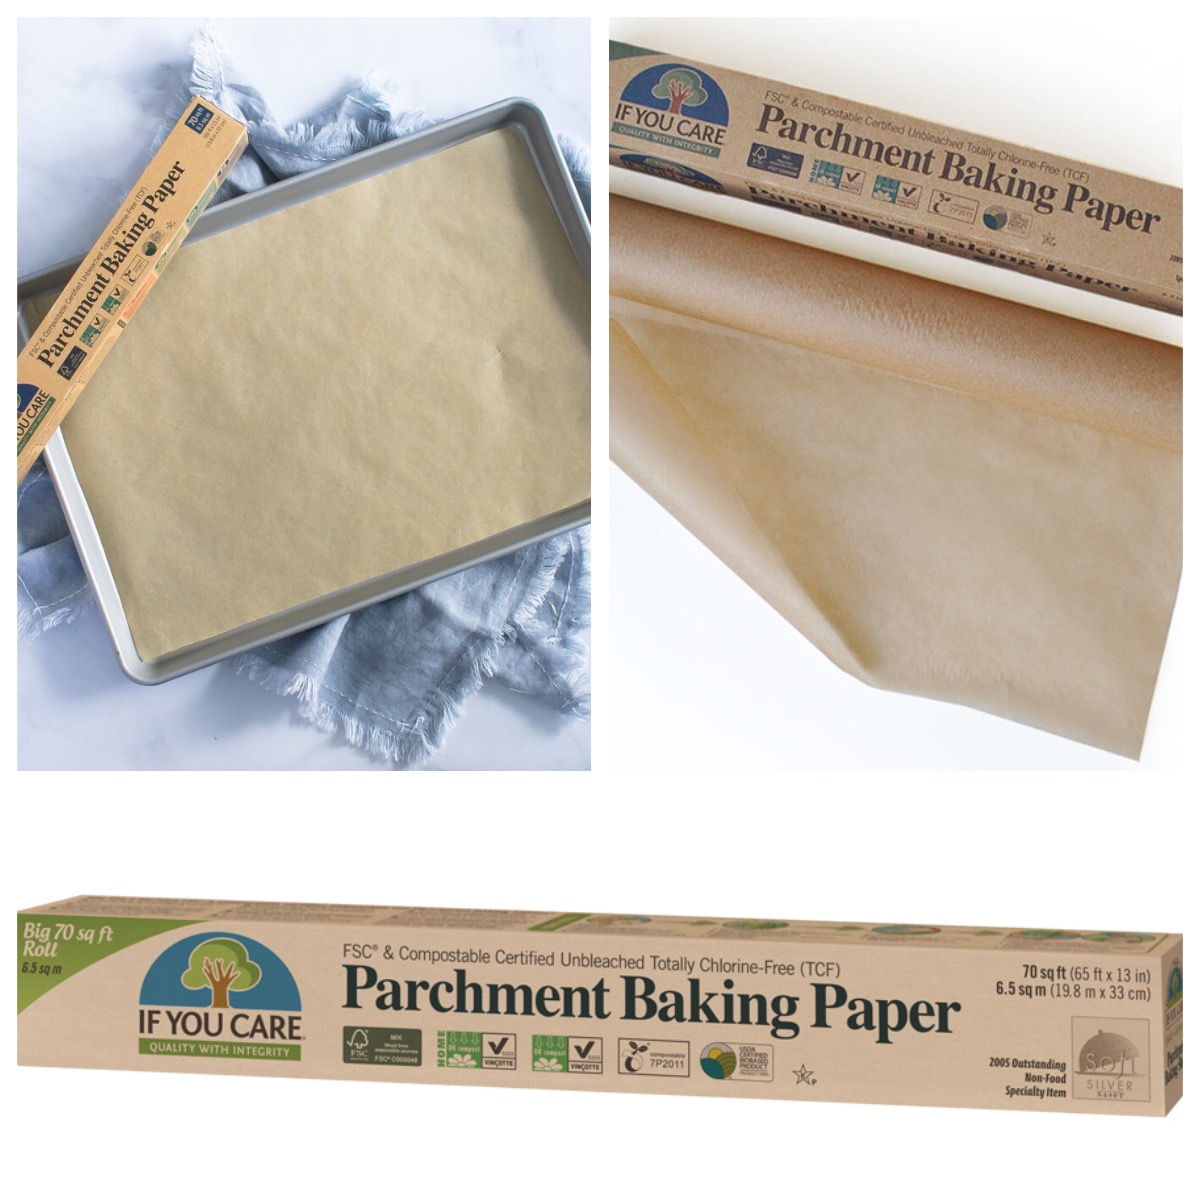 https://andersonsneck.com/wp-content/uploads/2020/04/If-You-Care-Parchment-Baking-Paper.jpg